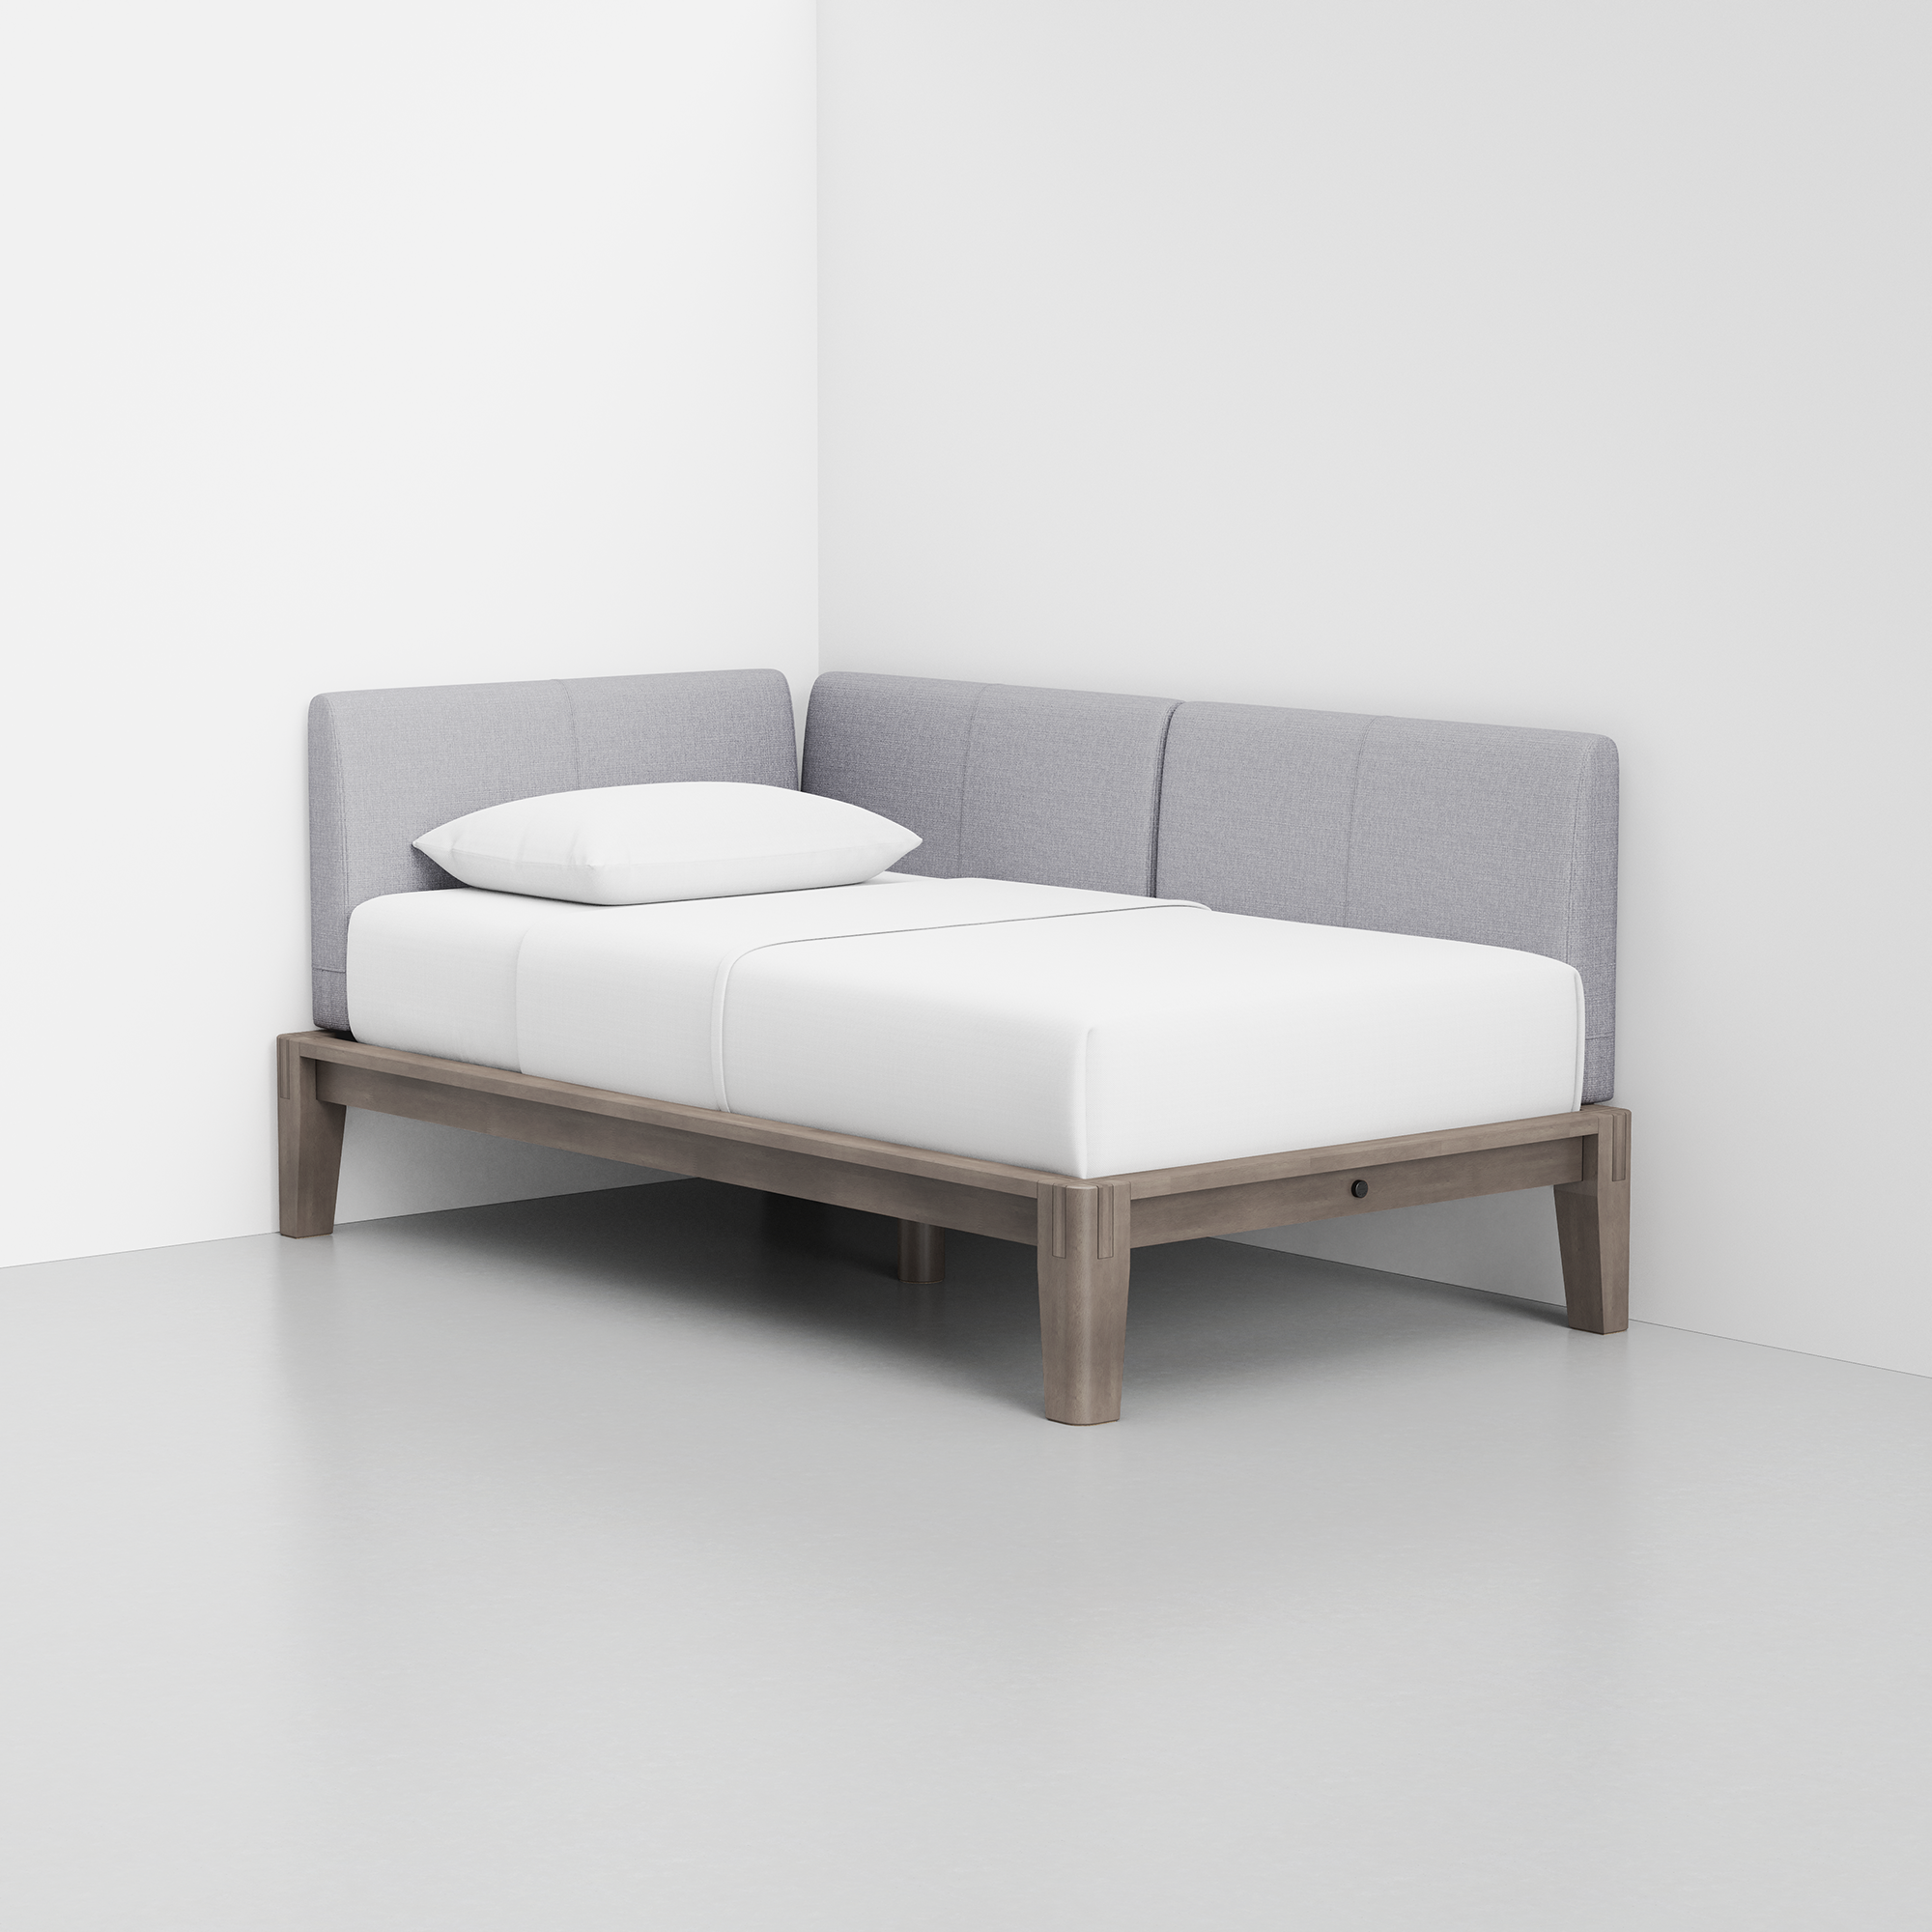 PDP Image: The Daybed (Grey / Fog Grey) - Rendering - Front